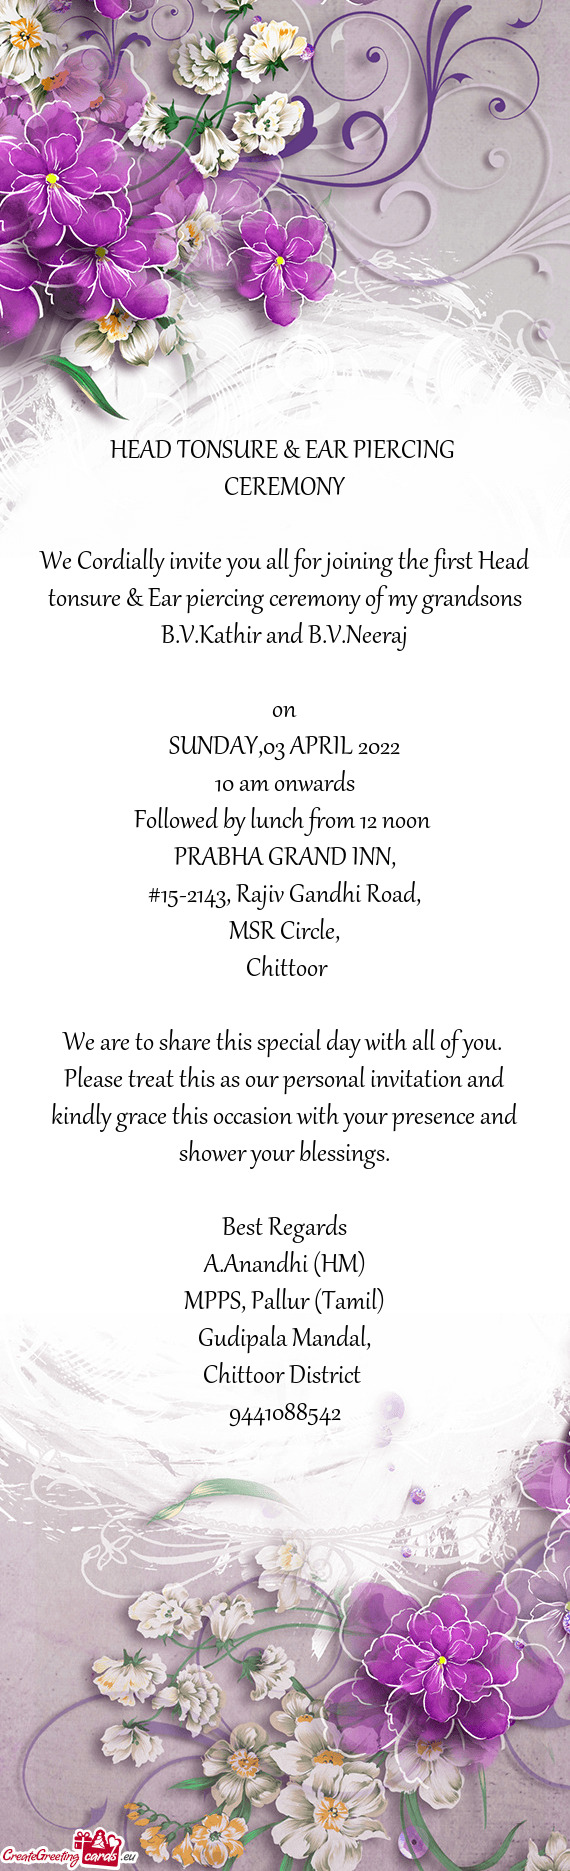 We Cordially invite you all for joining the first Head tonsure & Ear piercing ceremony of my grandso